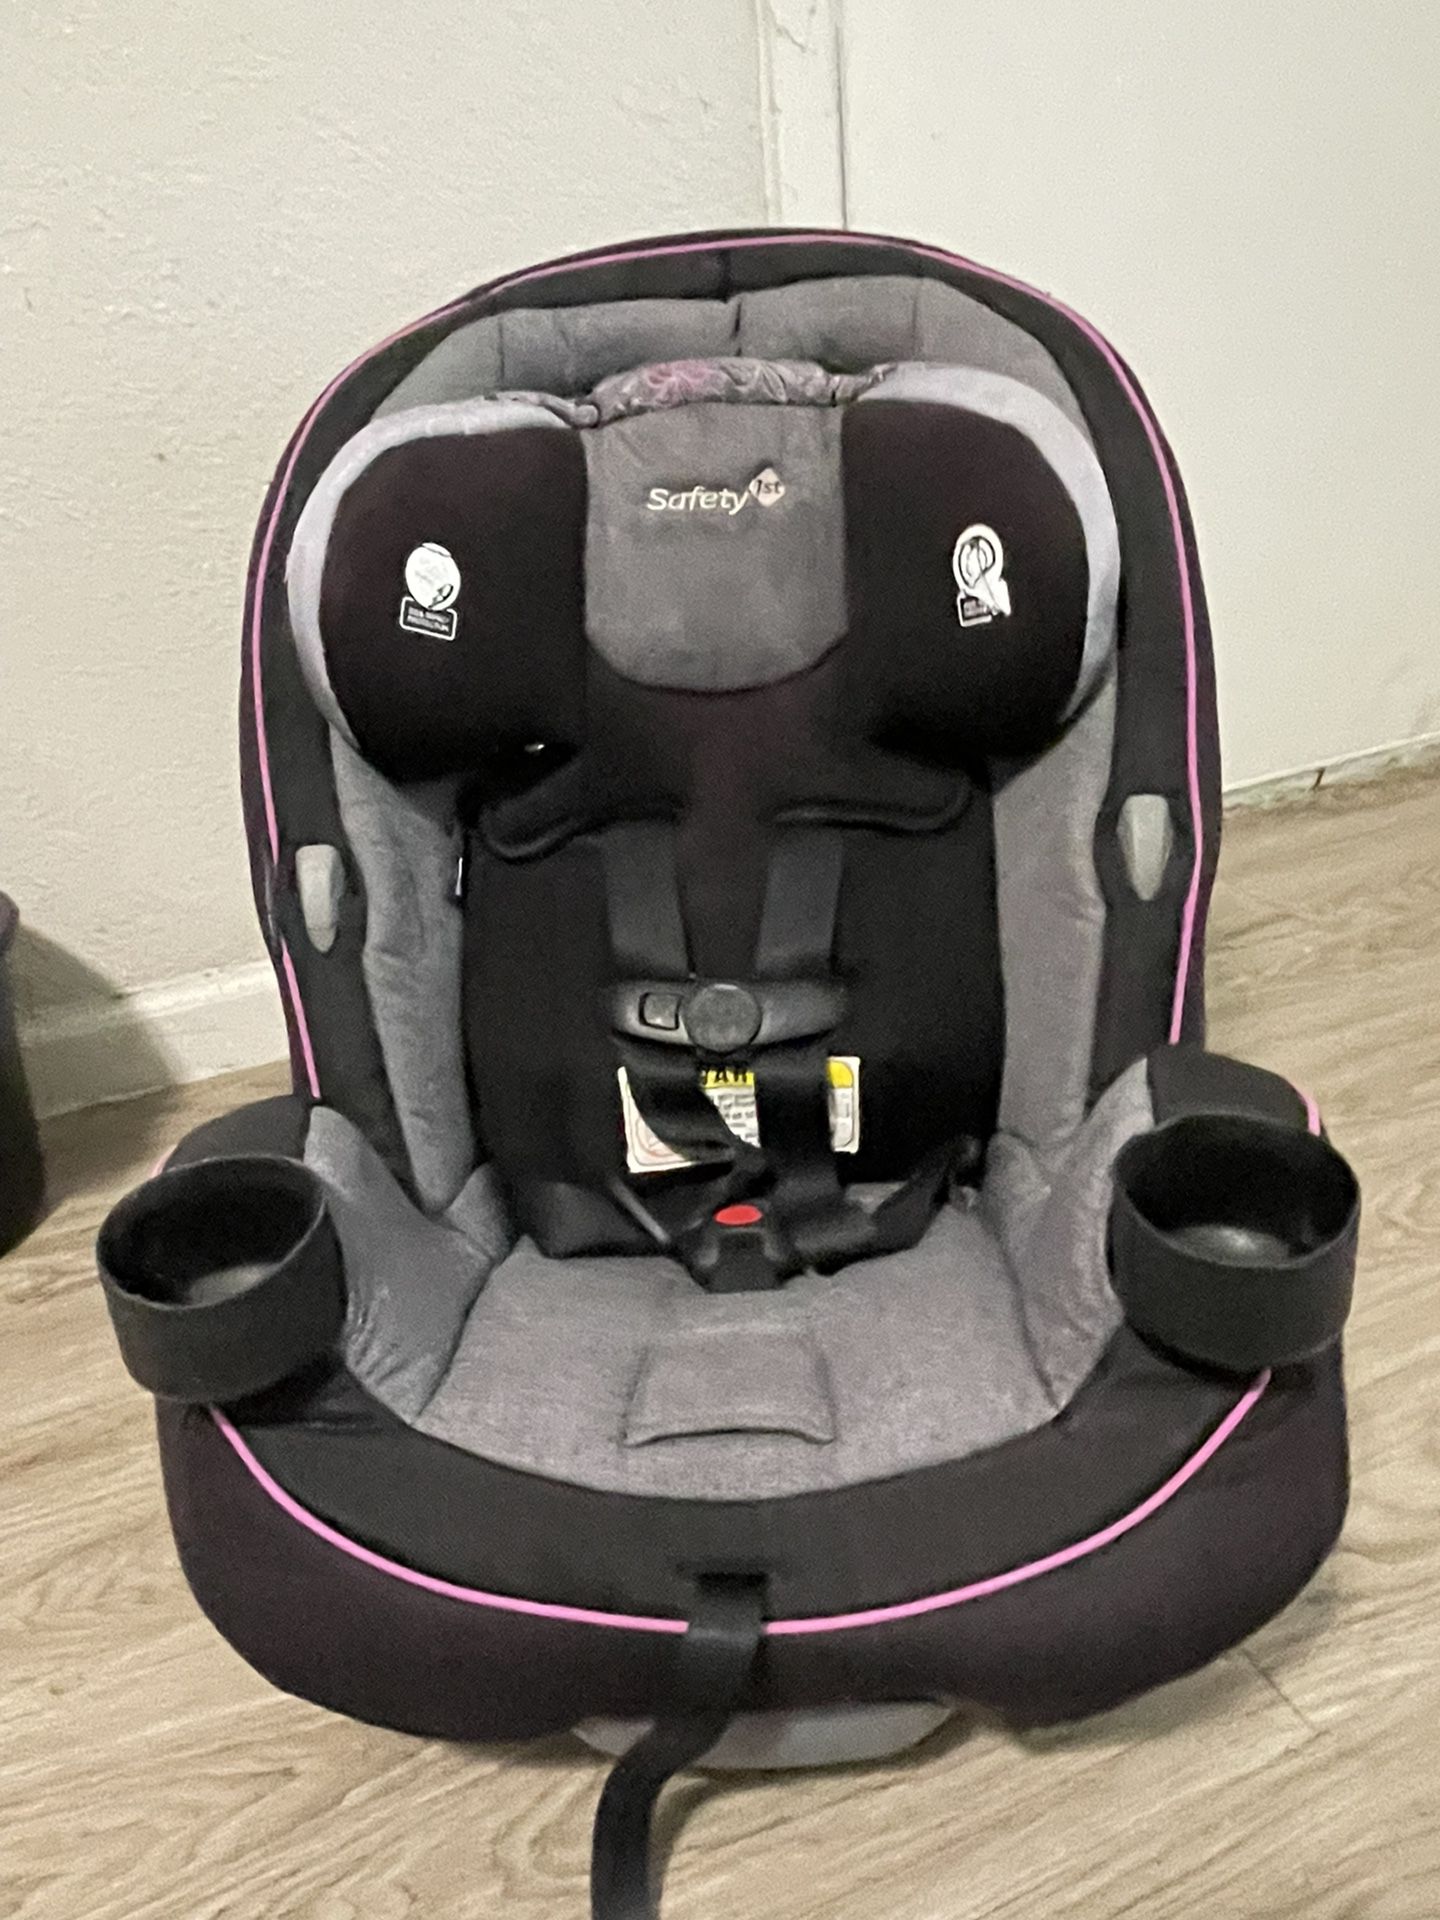 Graco Safety First Car seat 